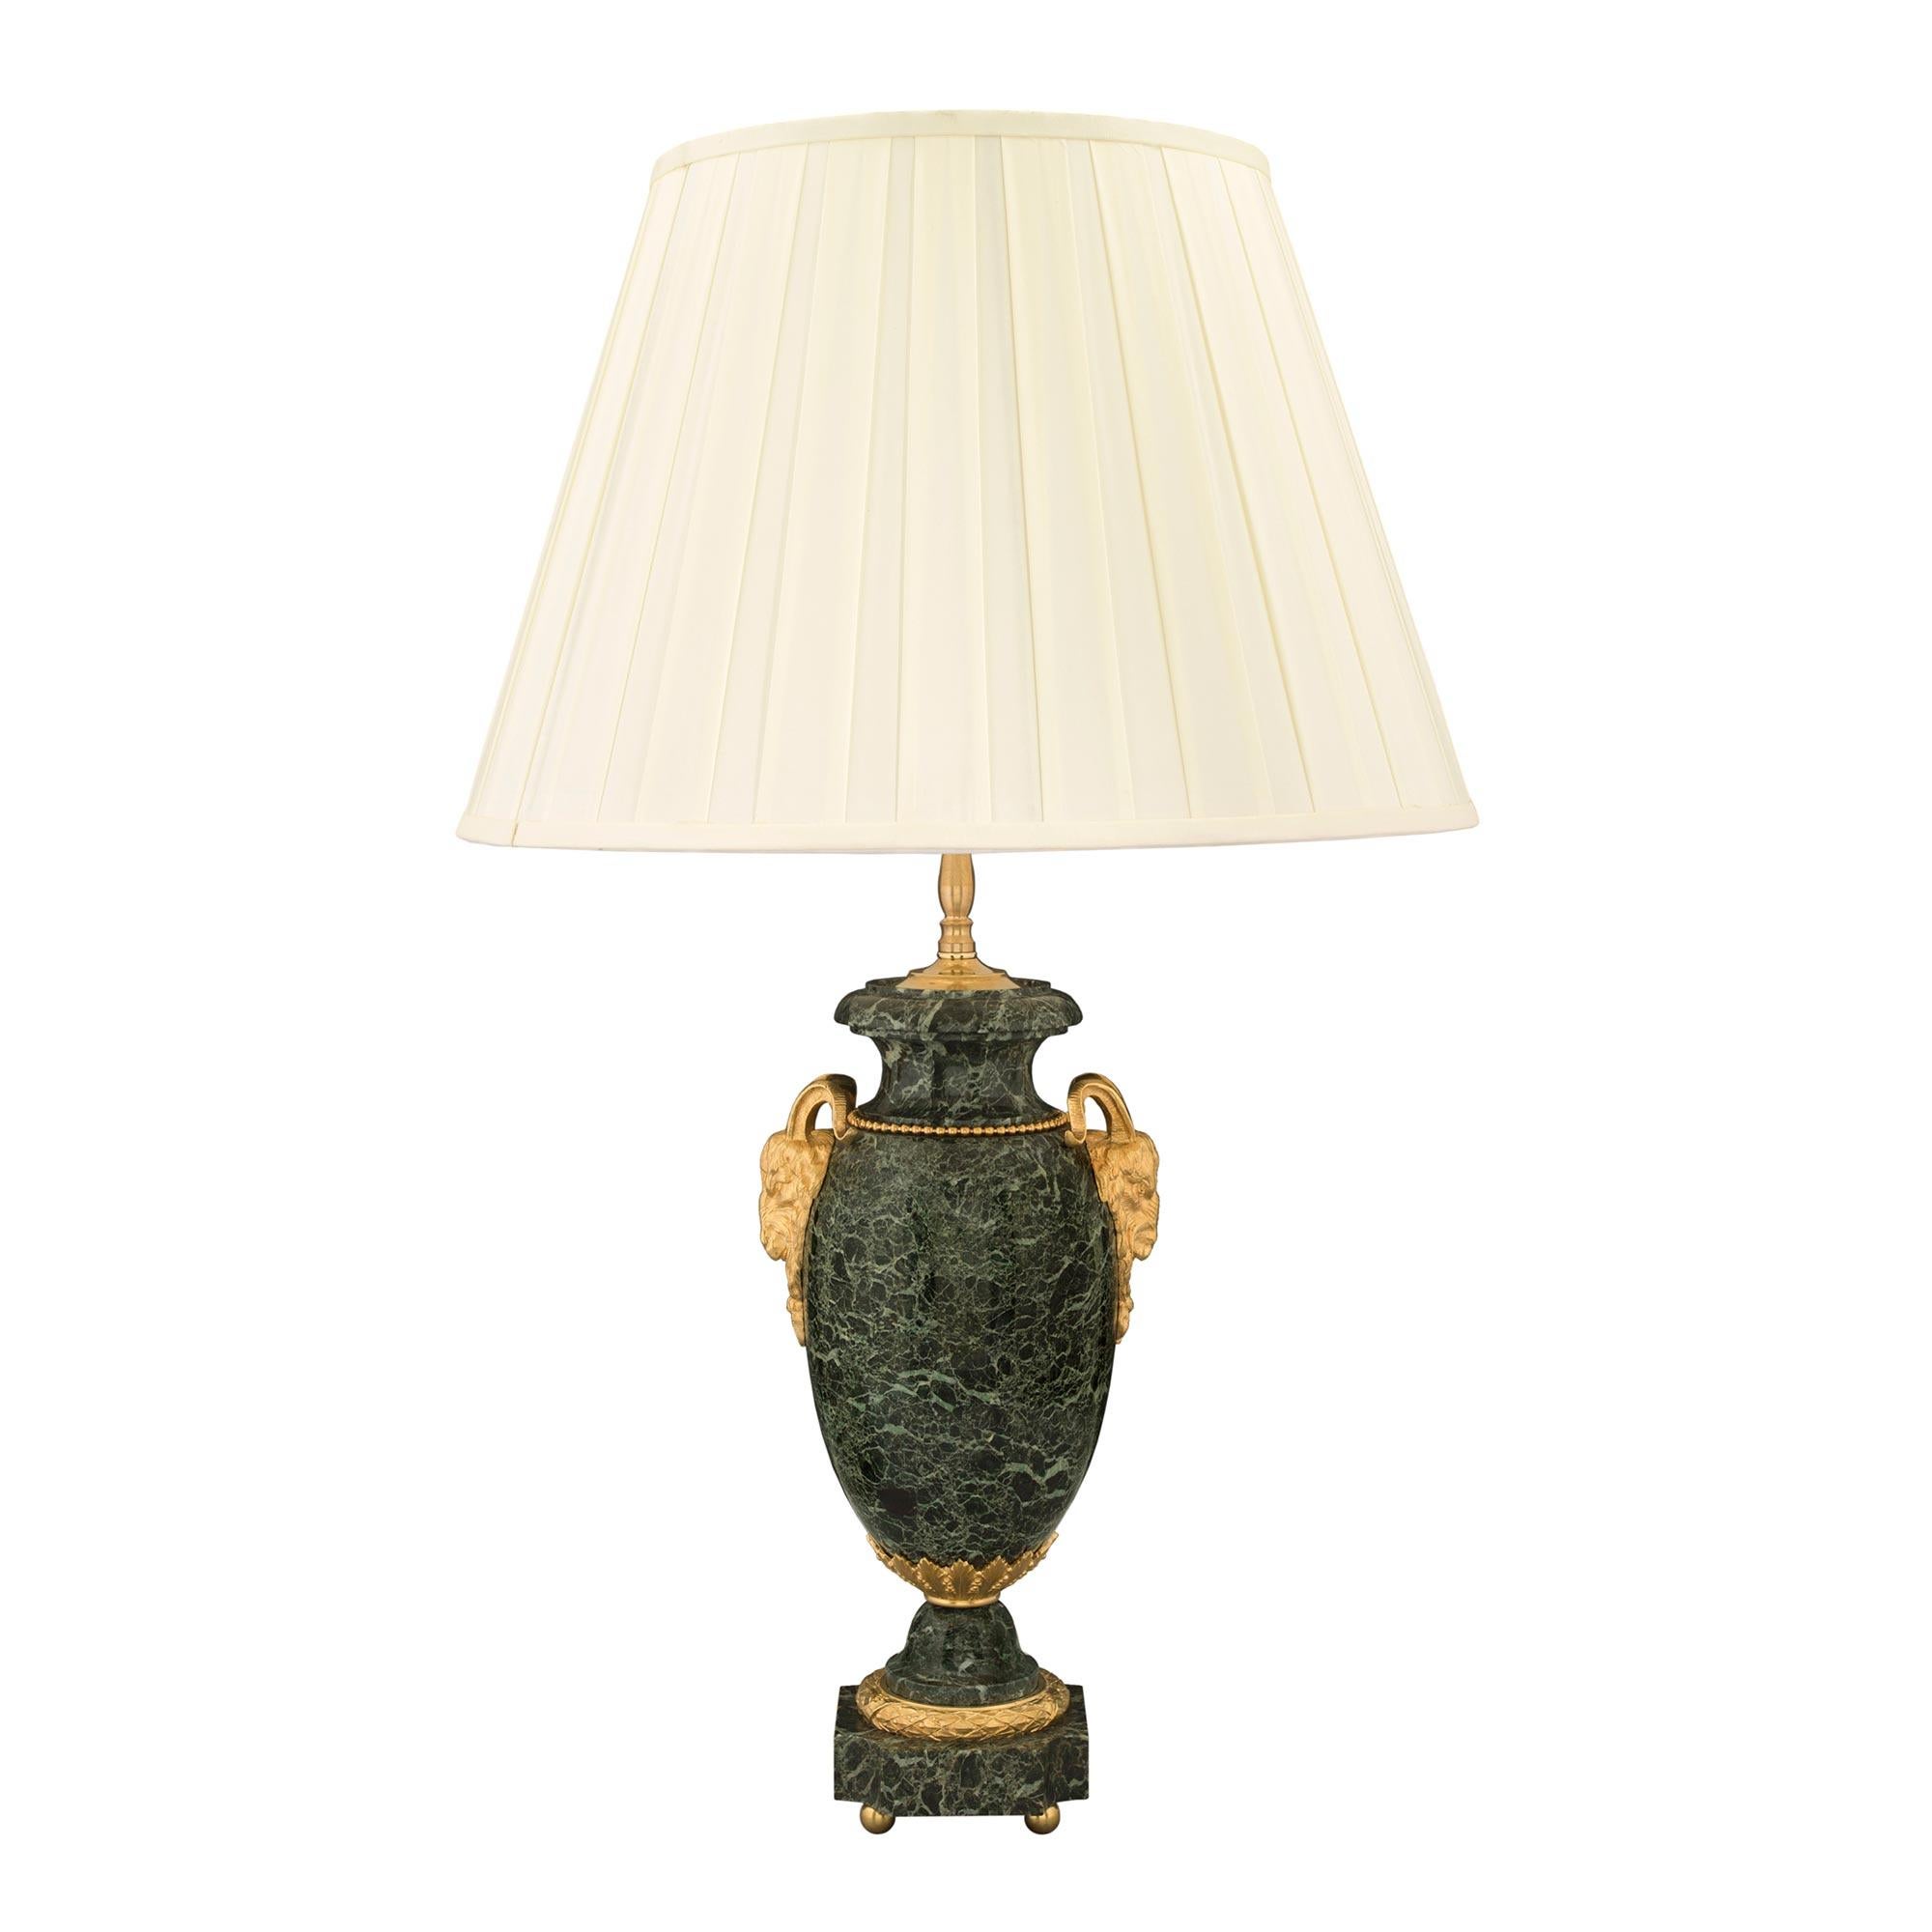 Pair of French Mid-19th Century Louis XVI Style Marble and Ormolu Lamps For Sale 1